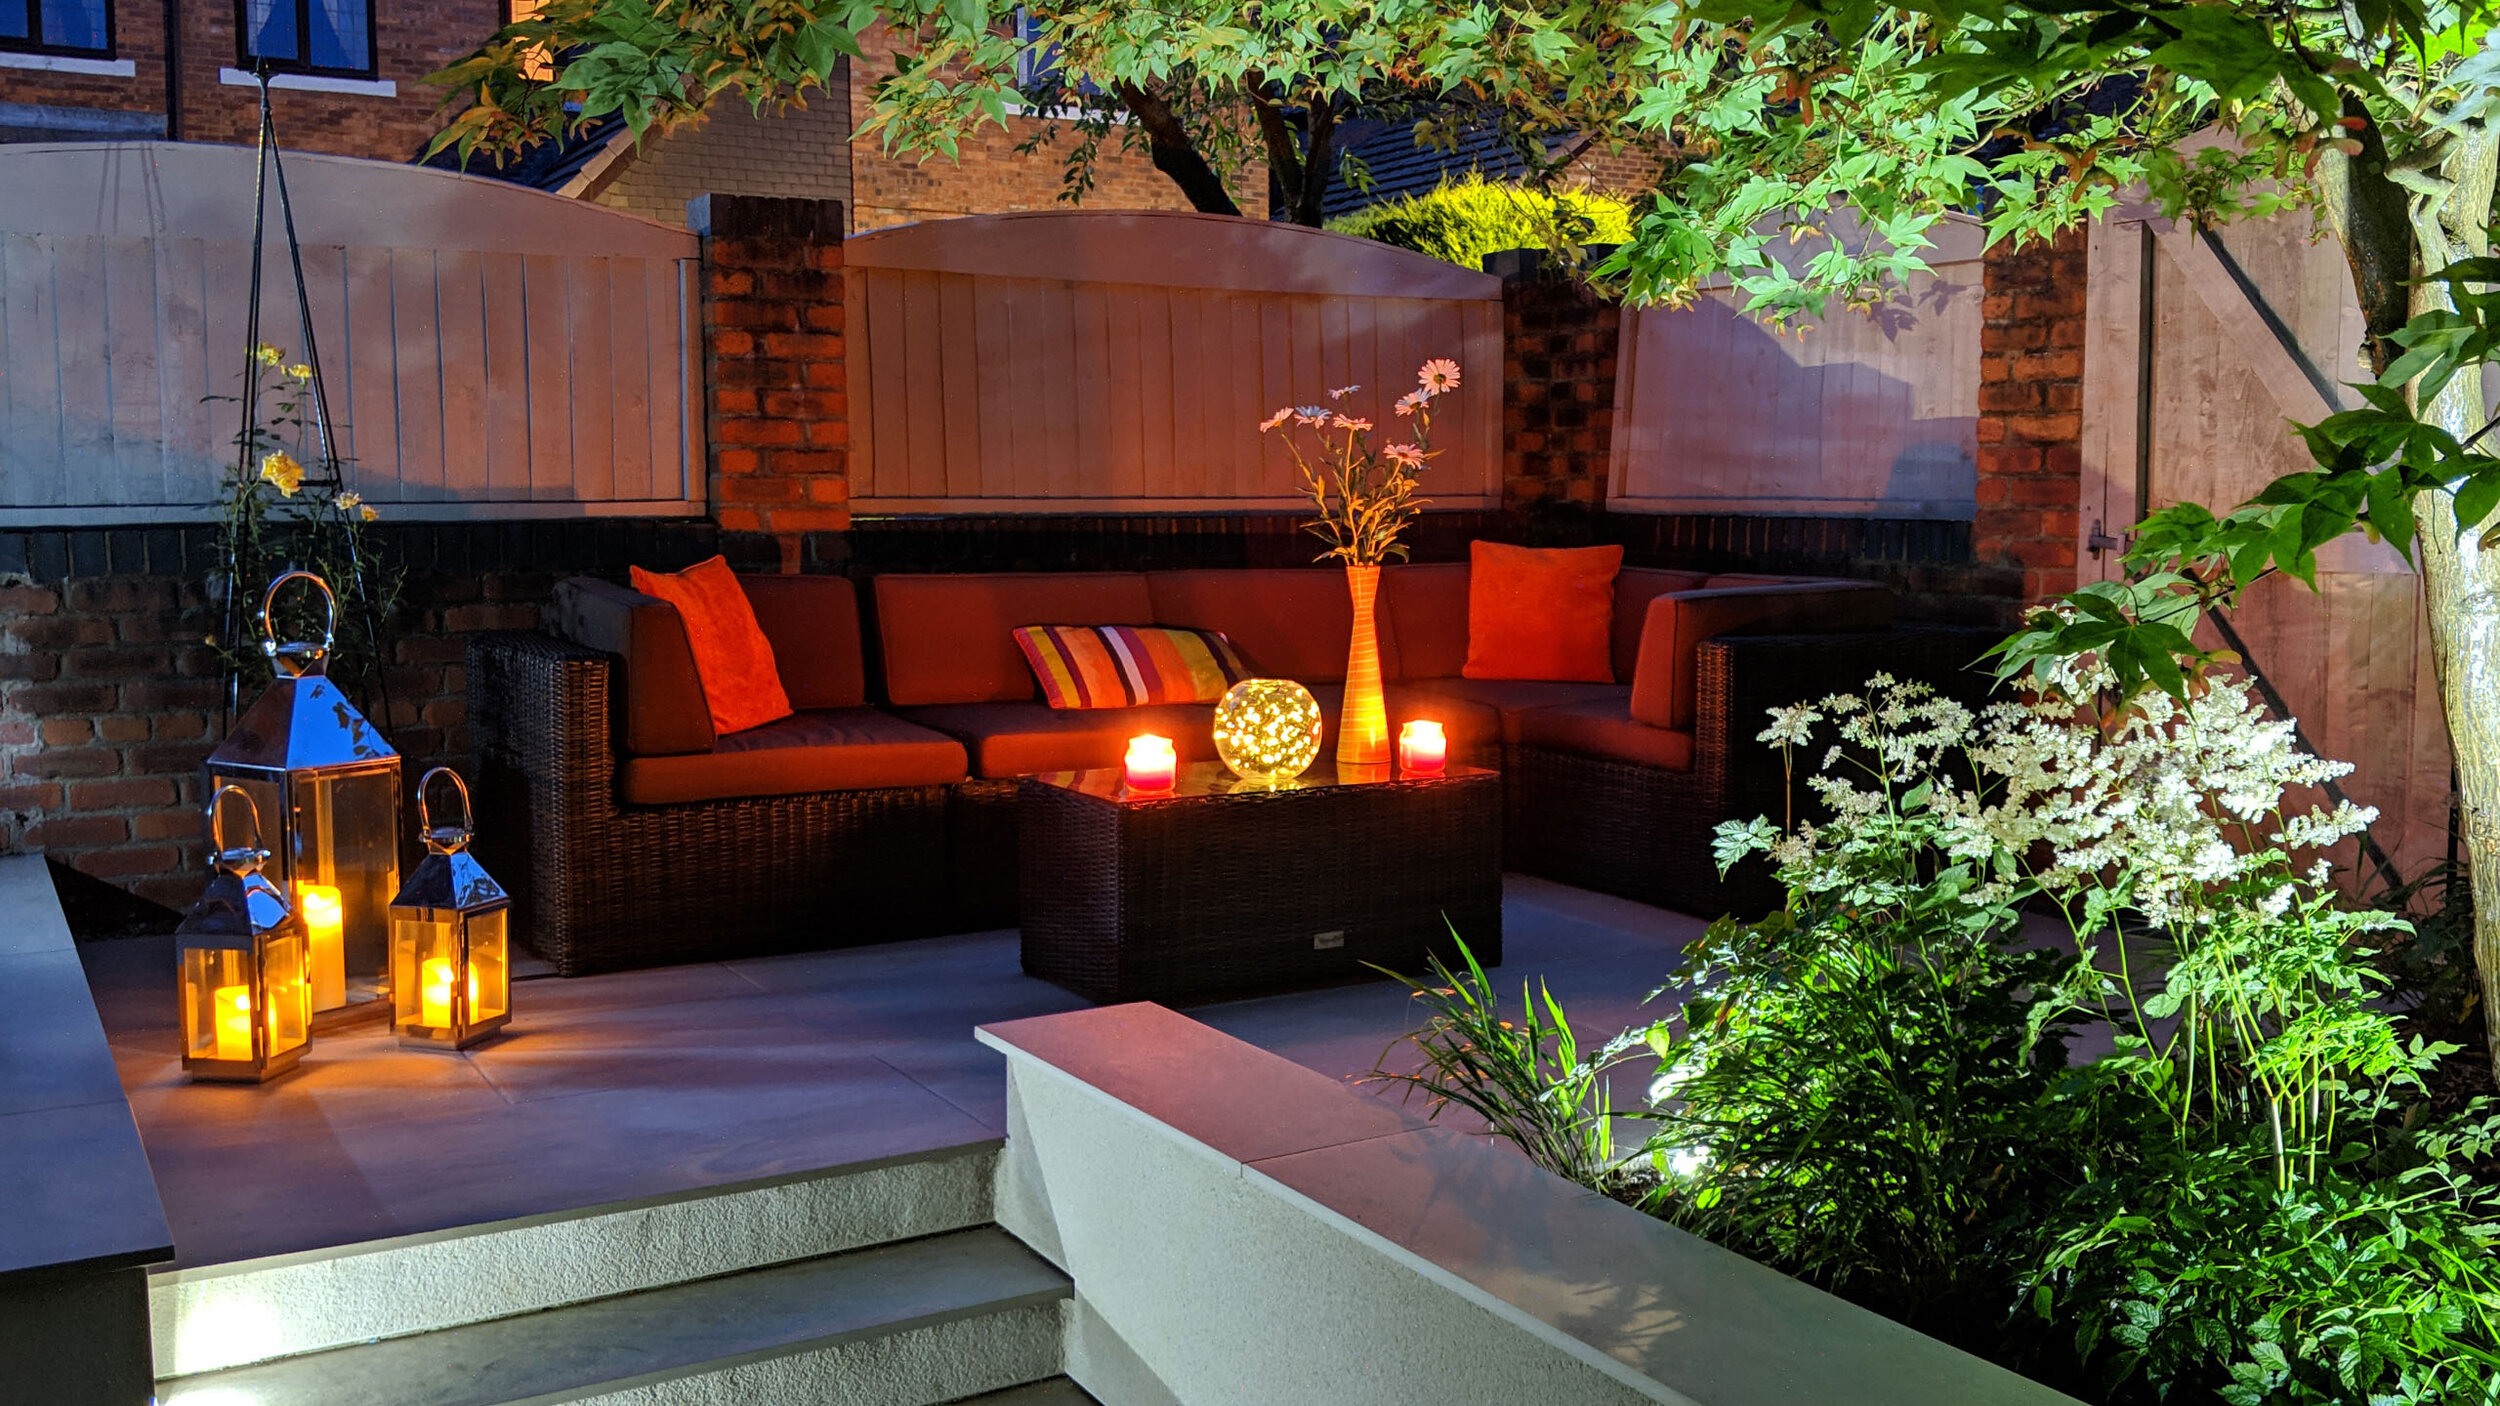 Bolton yard - Outdoor seating area at night